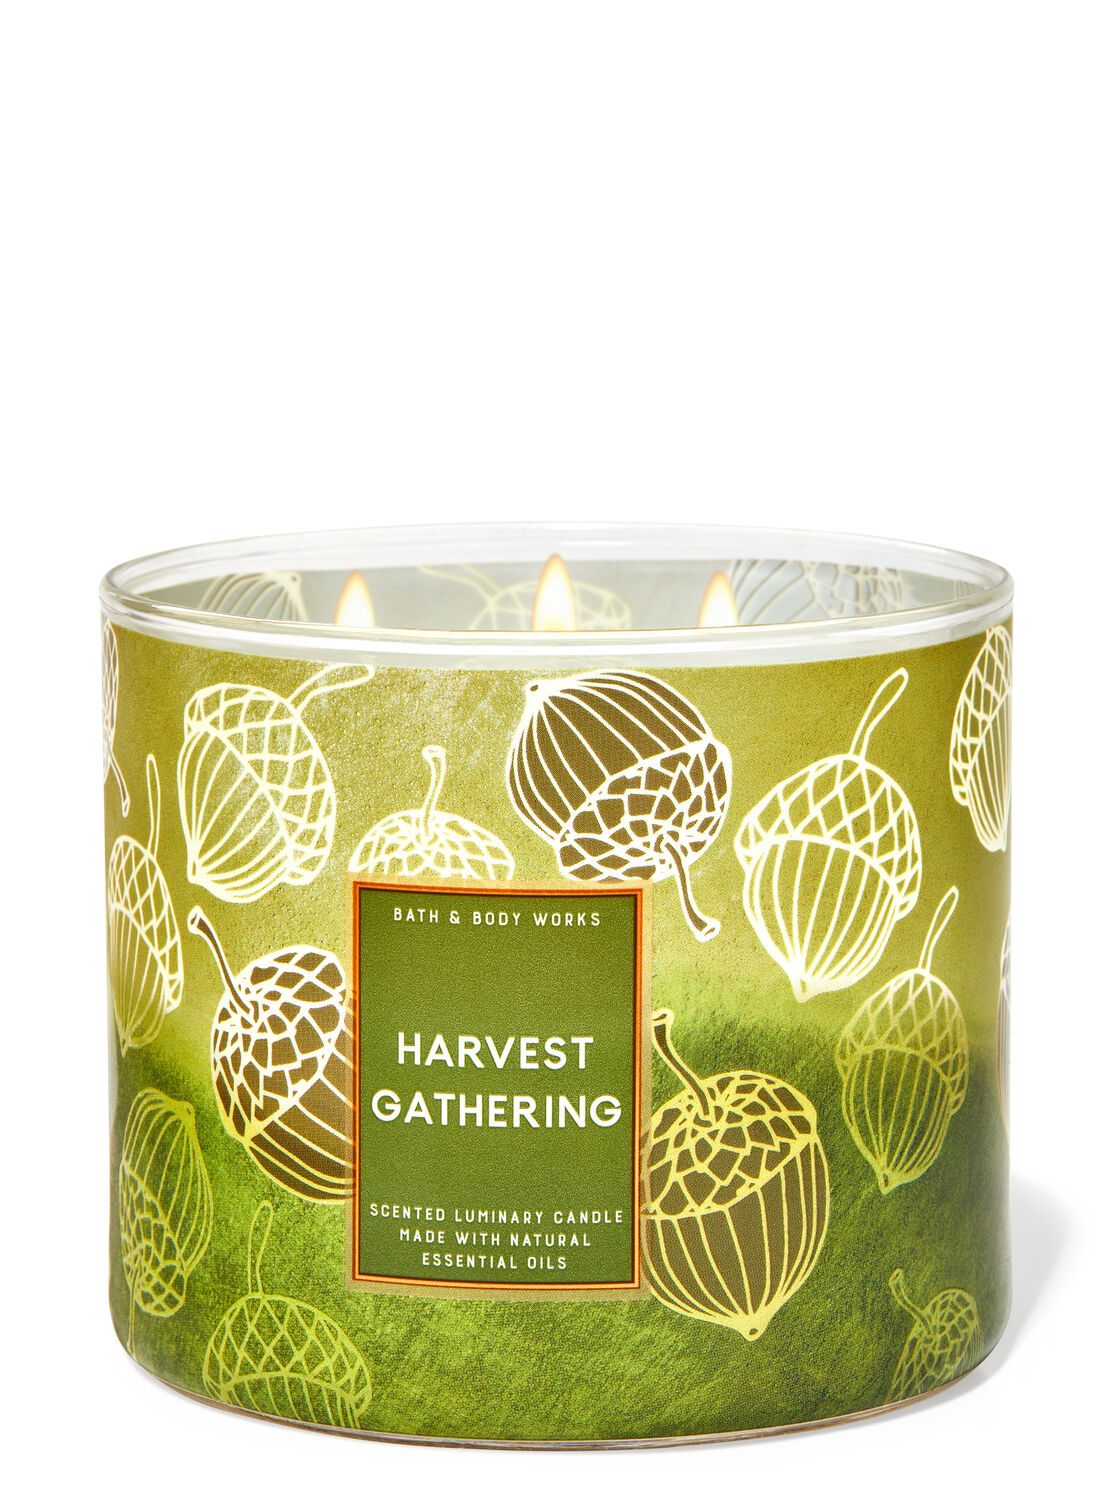 1 Bath & Body Works HARVEST GATHERING Large 3-Wick Scented Candle 14.5 oz 